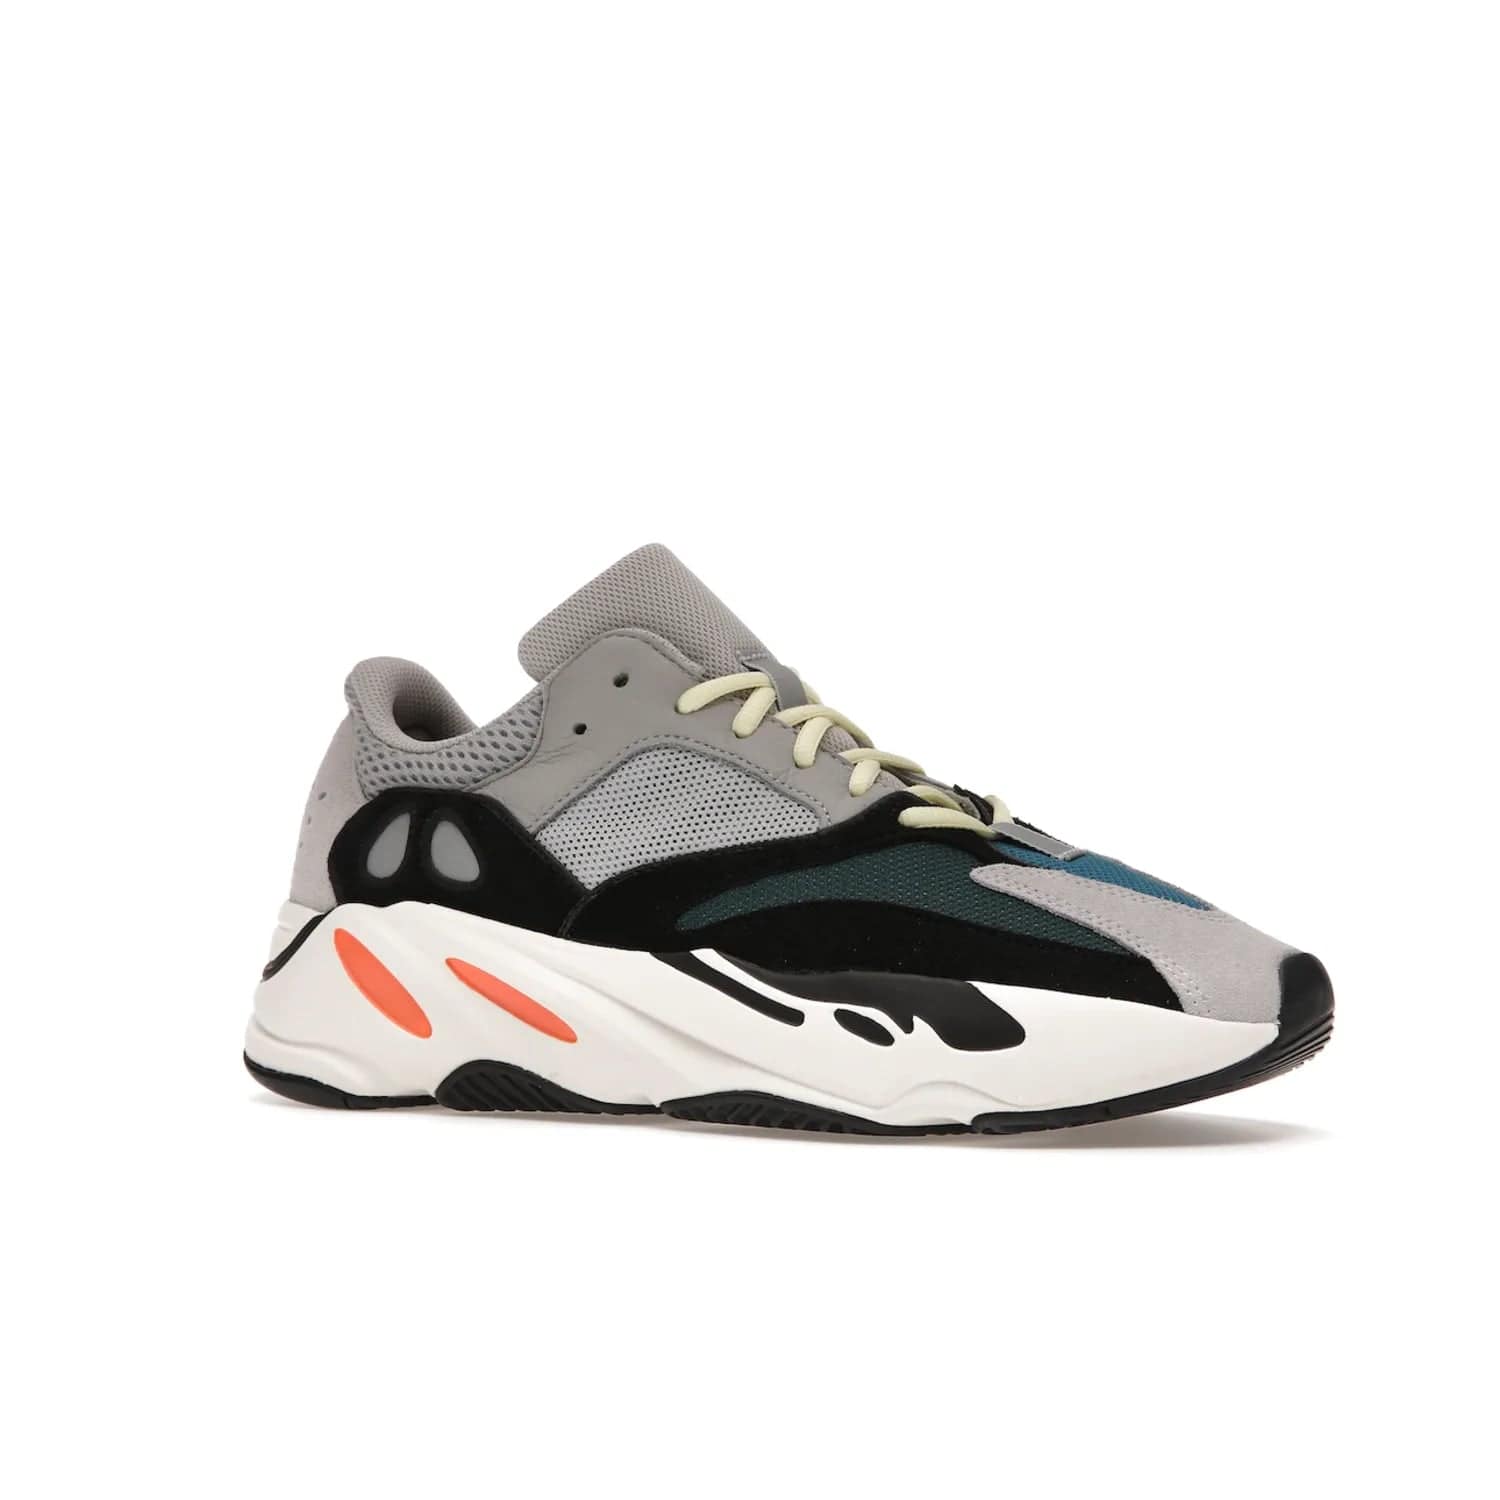 adidas Yeezy Boost 700 Wave Runner - Image 4 - Only at www.BallersClubKickz.com - Shop the iconic adidas Yeezy Boost 700 Wave Runner. Featuring grey mesh and leather upper, black suede overlays, teal mesh underlays, and signature Boost sole. Be bold & make a statement.